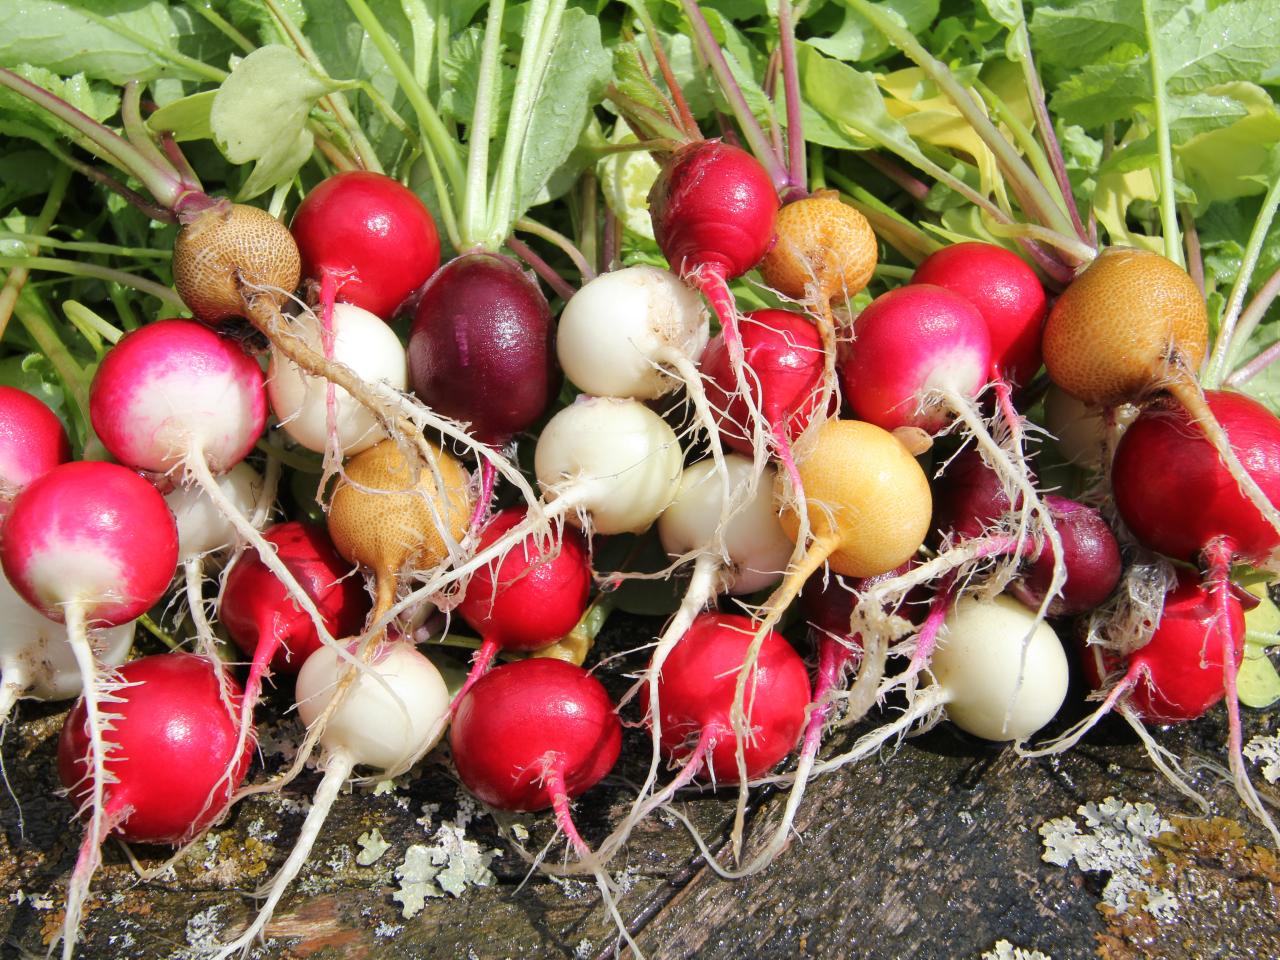 How To Store Radishes From The Garden